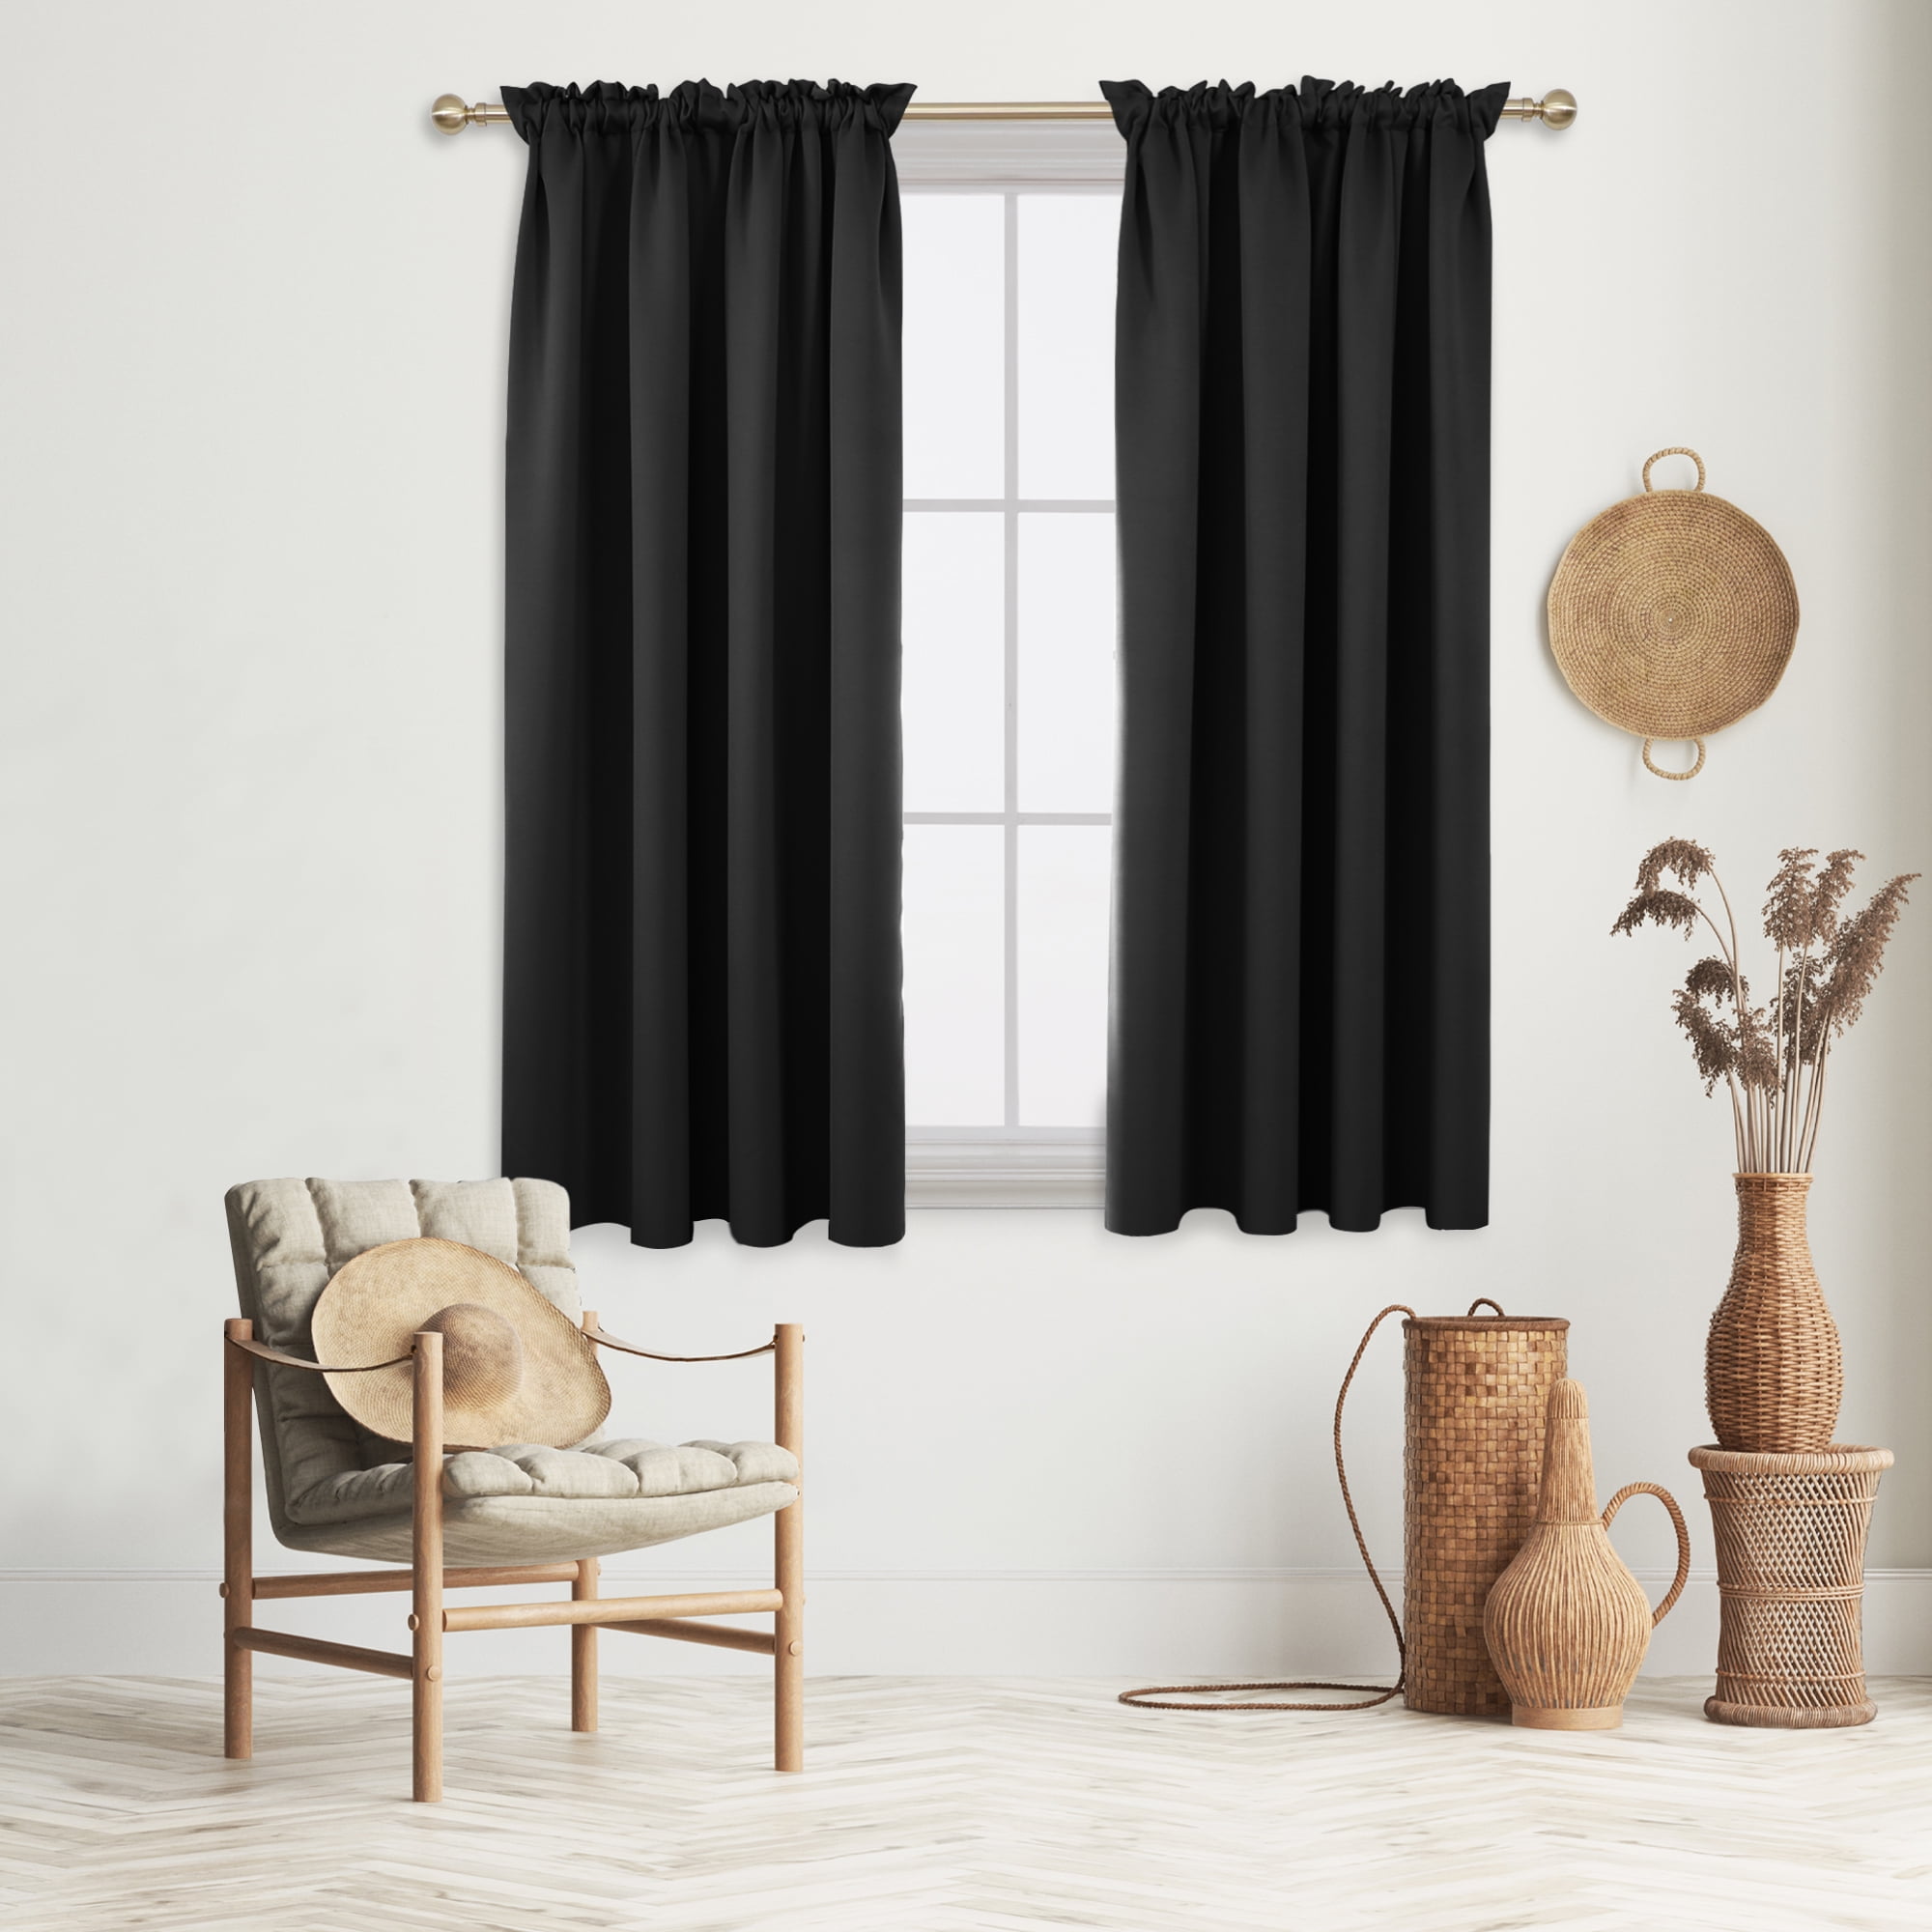 Deconovo Bedroom Curtains Dotted Line Foil Printed Thermal Insulated Window Treatment Eyelet Blackout Curtains for Livingroom 46 x 54 Inch Black Two Panels 